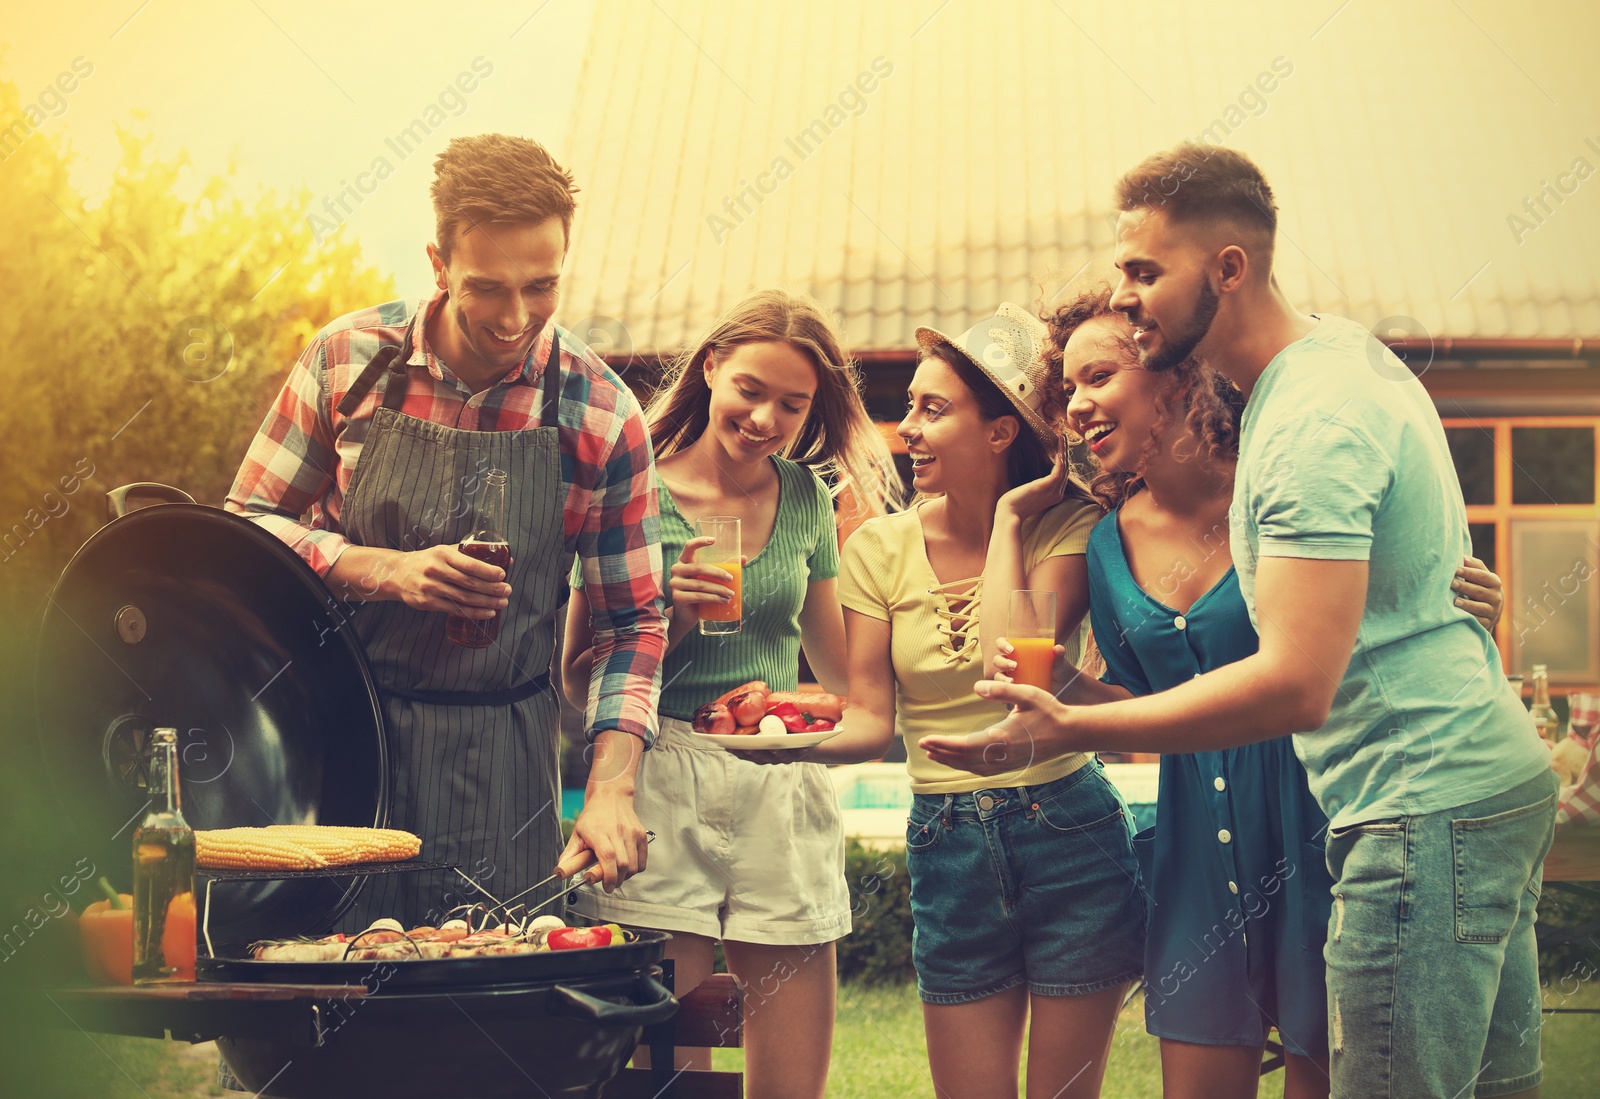 Image of Group of friends with drinks near barbecue grill outdoors on sunny day